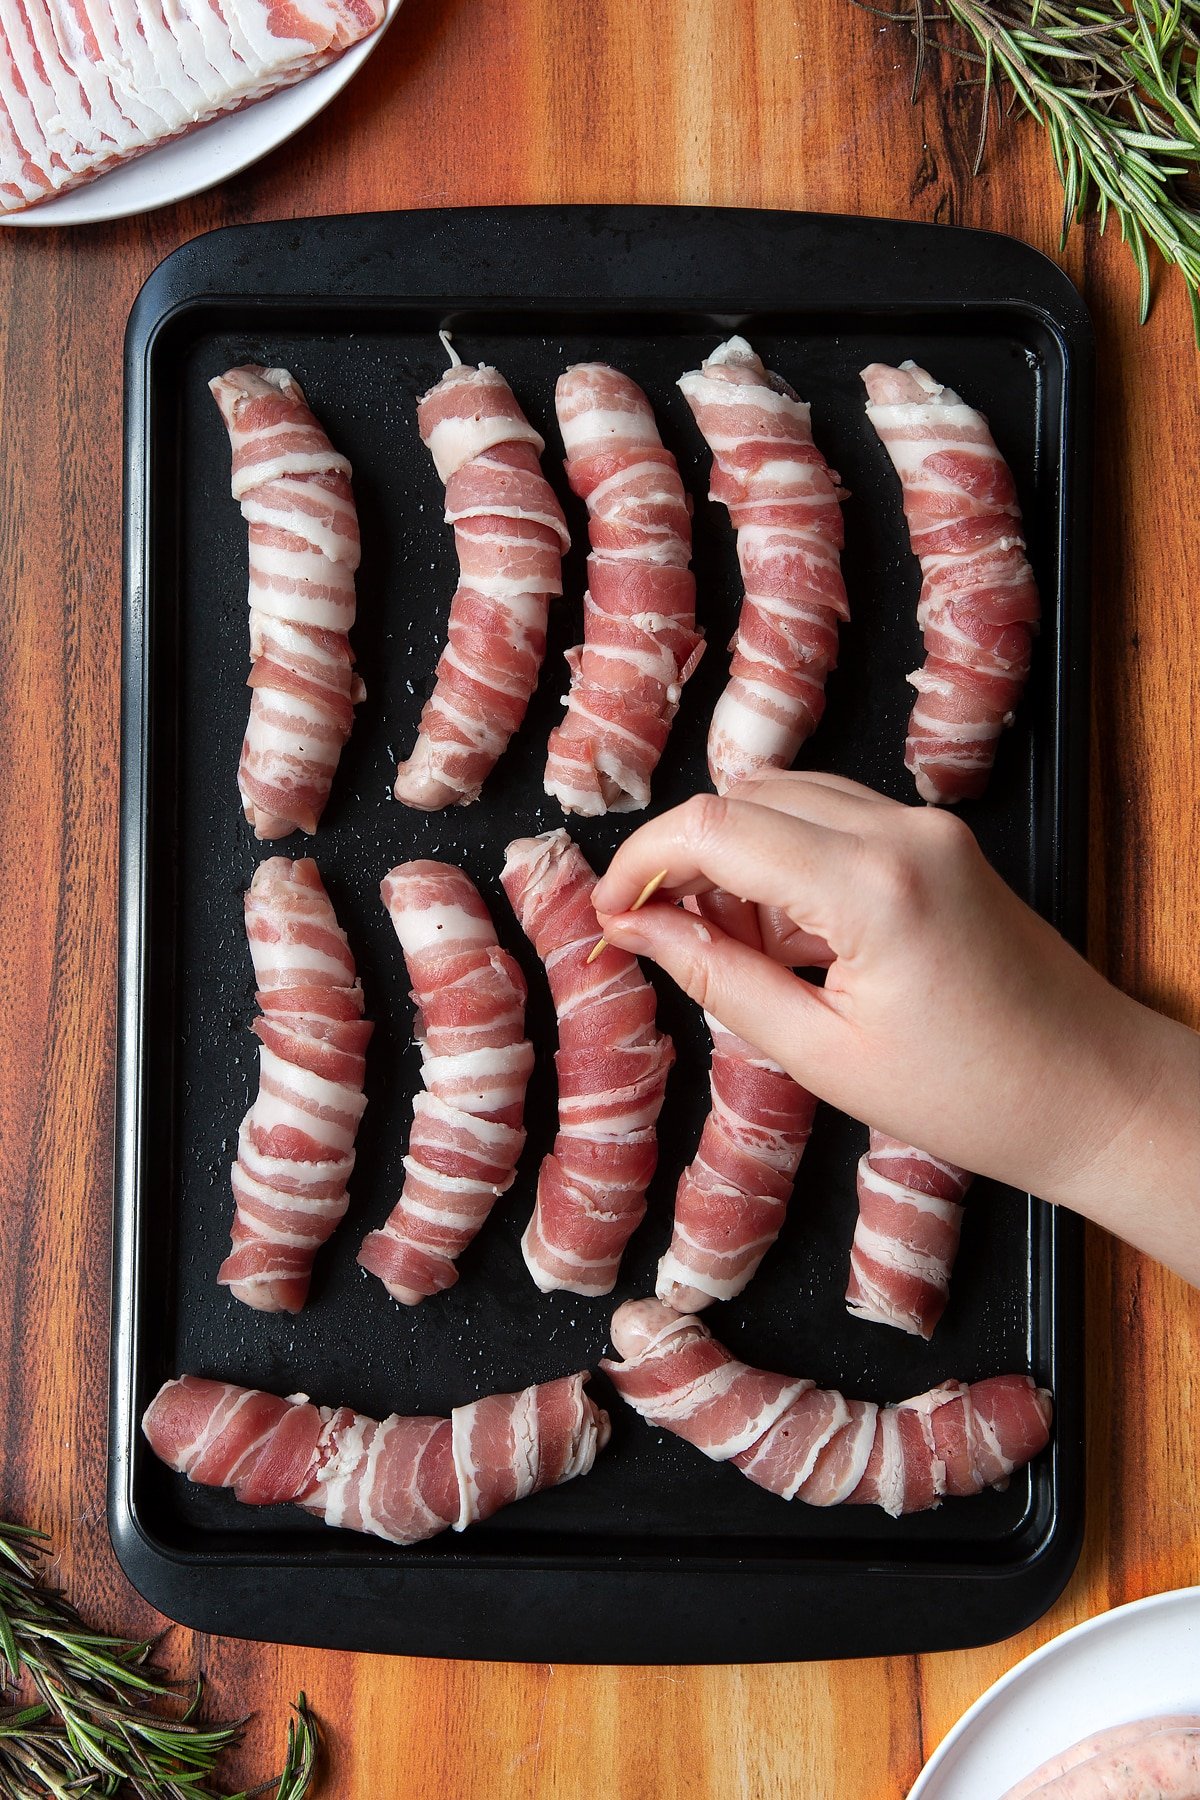 Overhead shot of a hand poking a bacon-wrapped sausage in a black tray